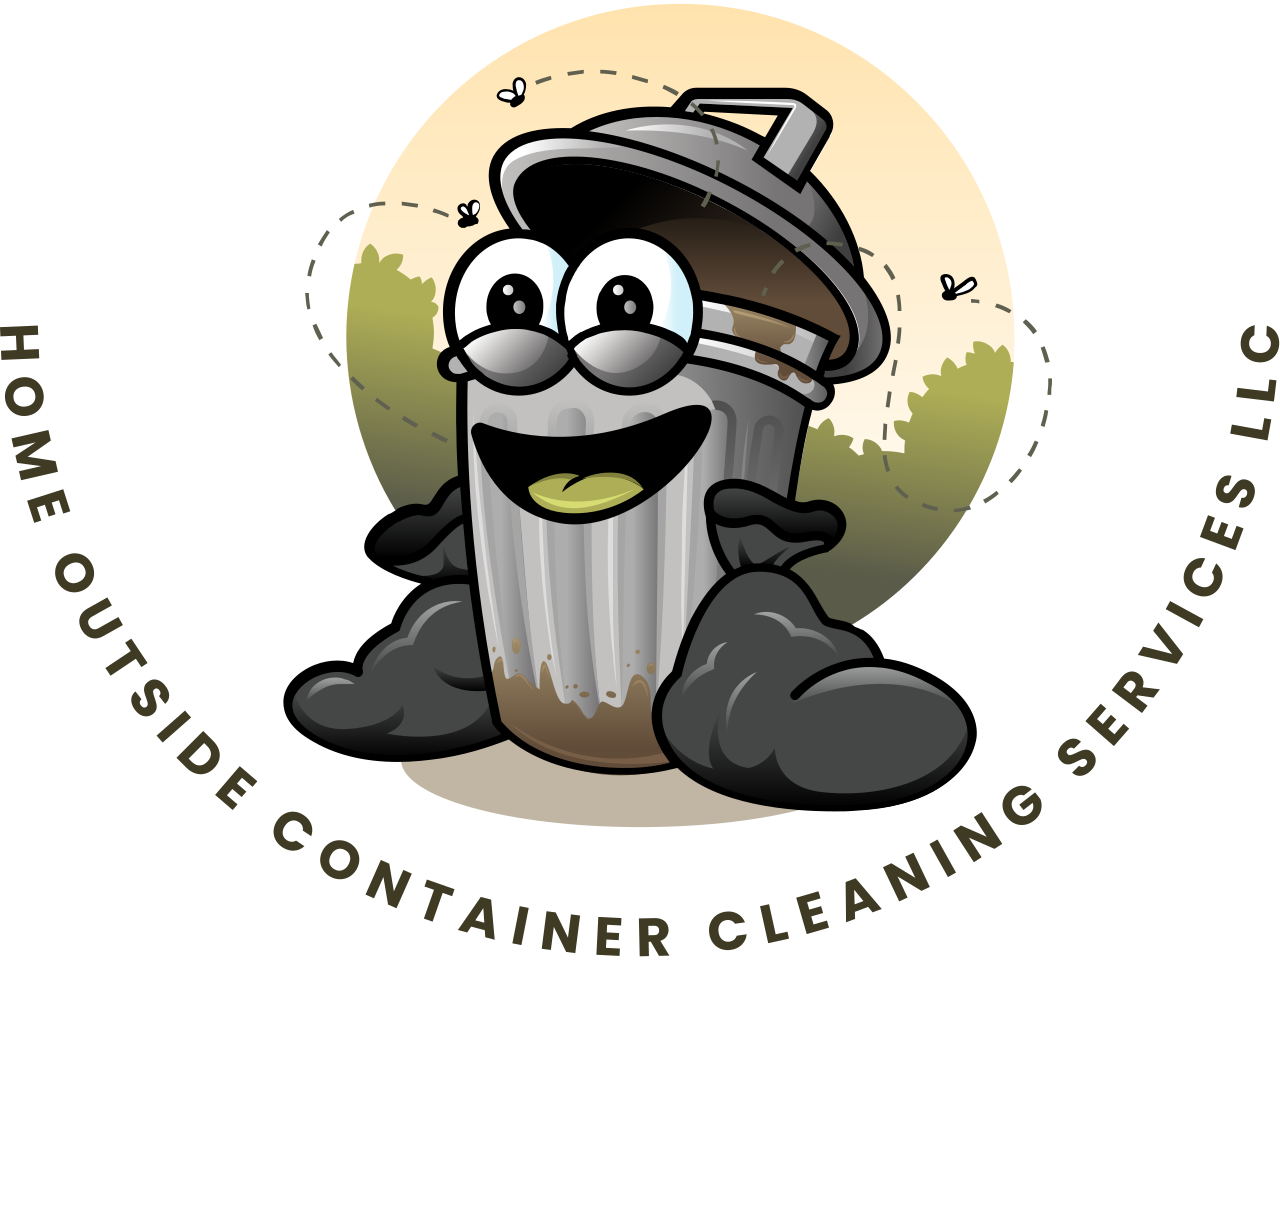 Home Outside Container Cleaning Services LLC's logo